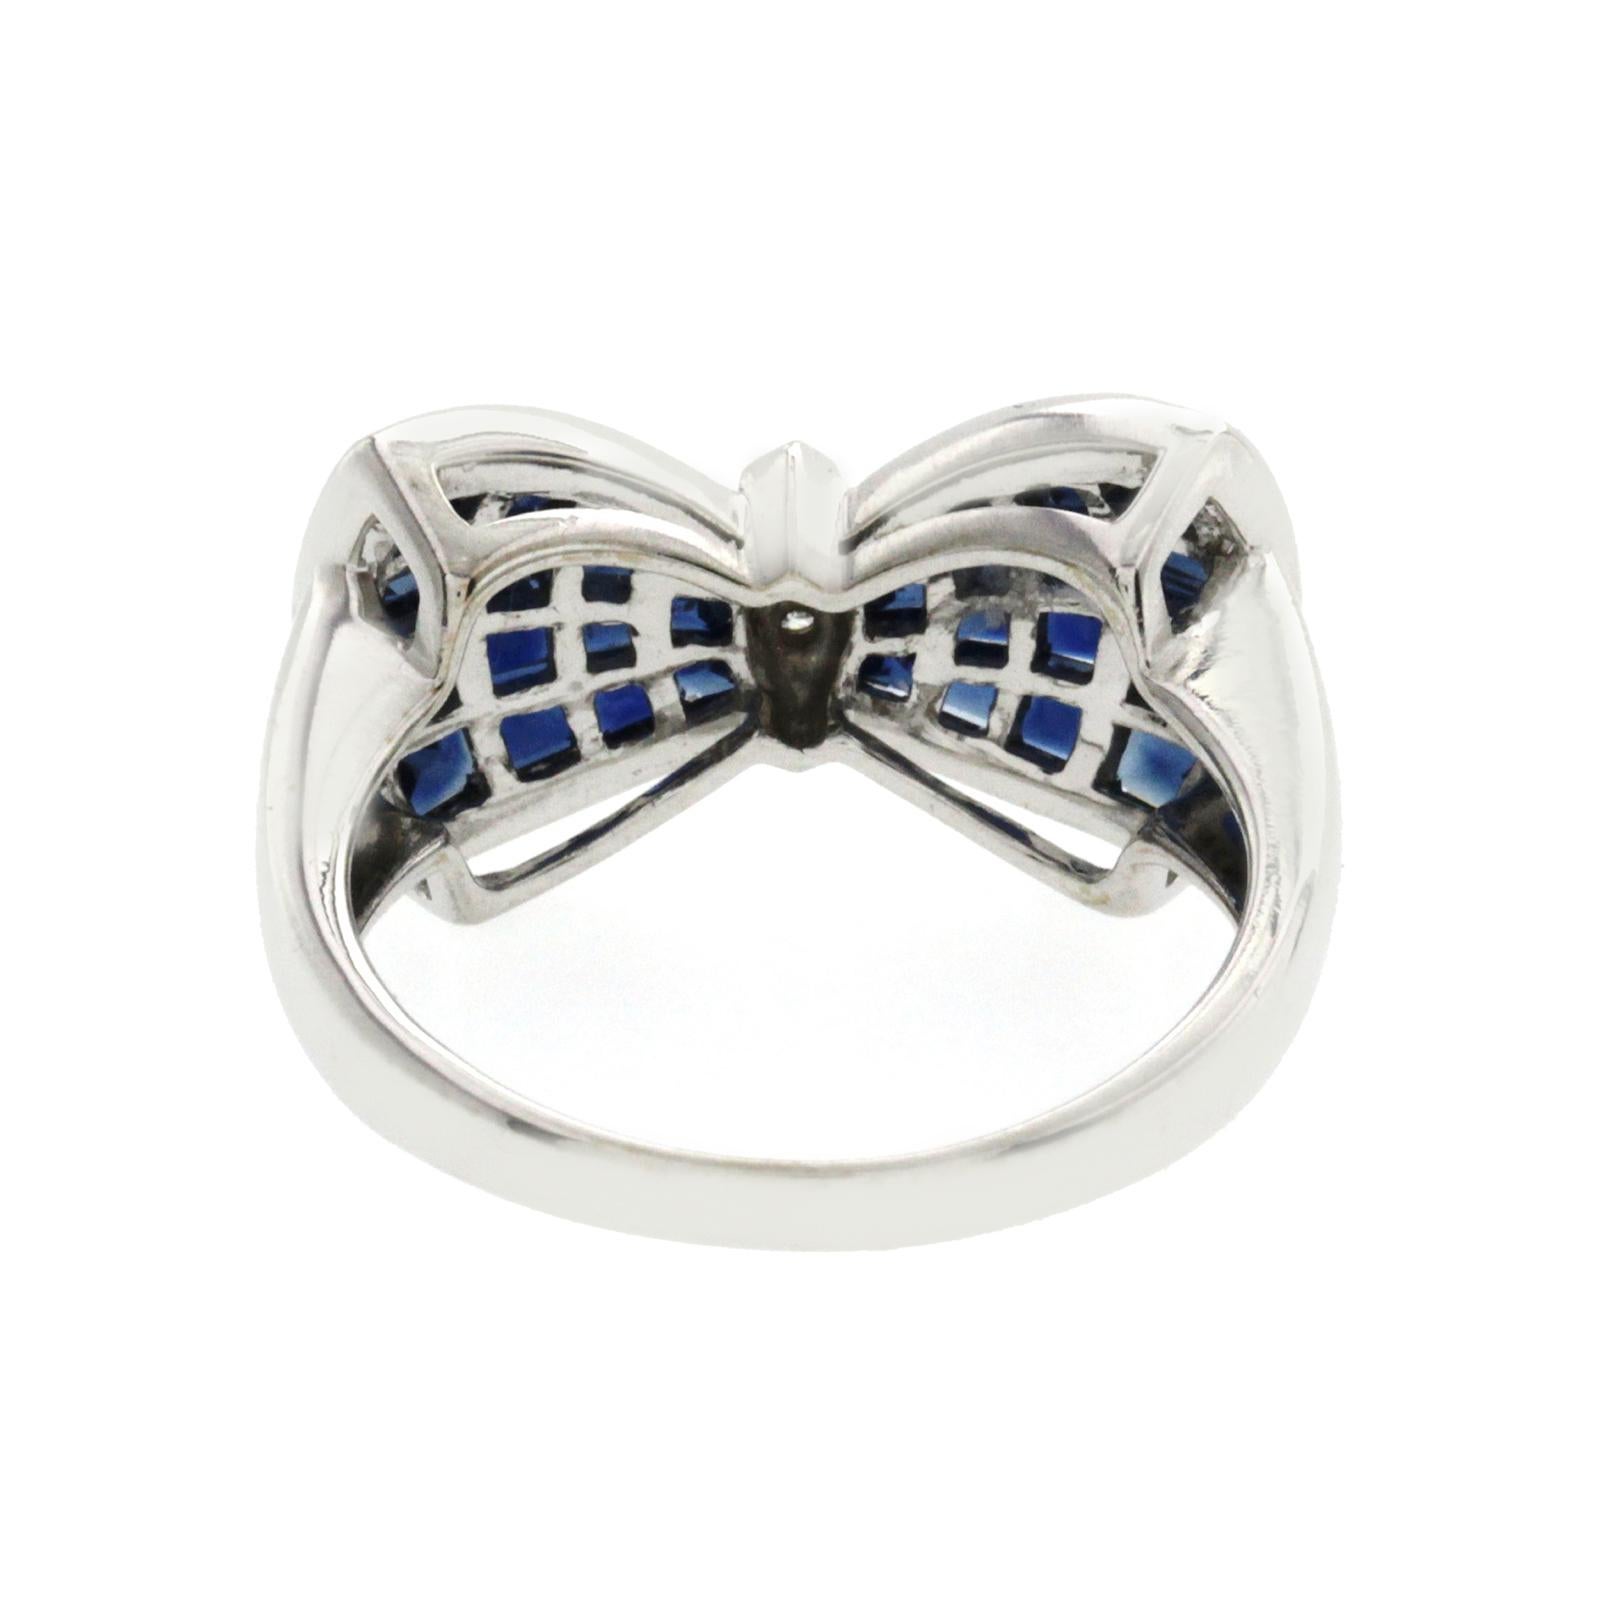 Women's Bow Tie 5.20 Carat Sapphires and Diamonds in 18 Karat White Gold Band Ring For Sale